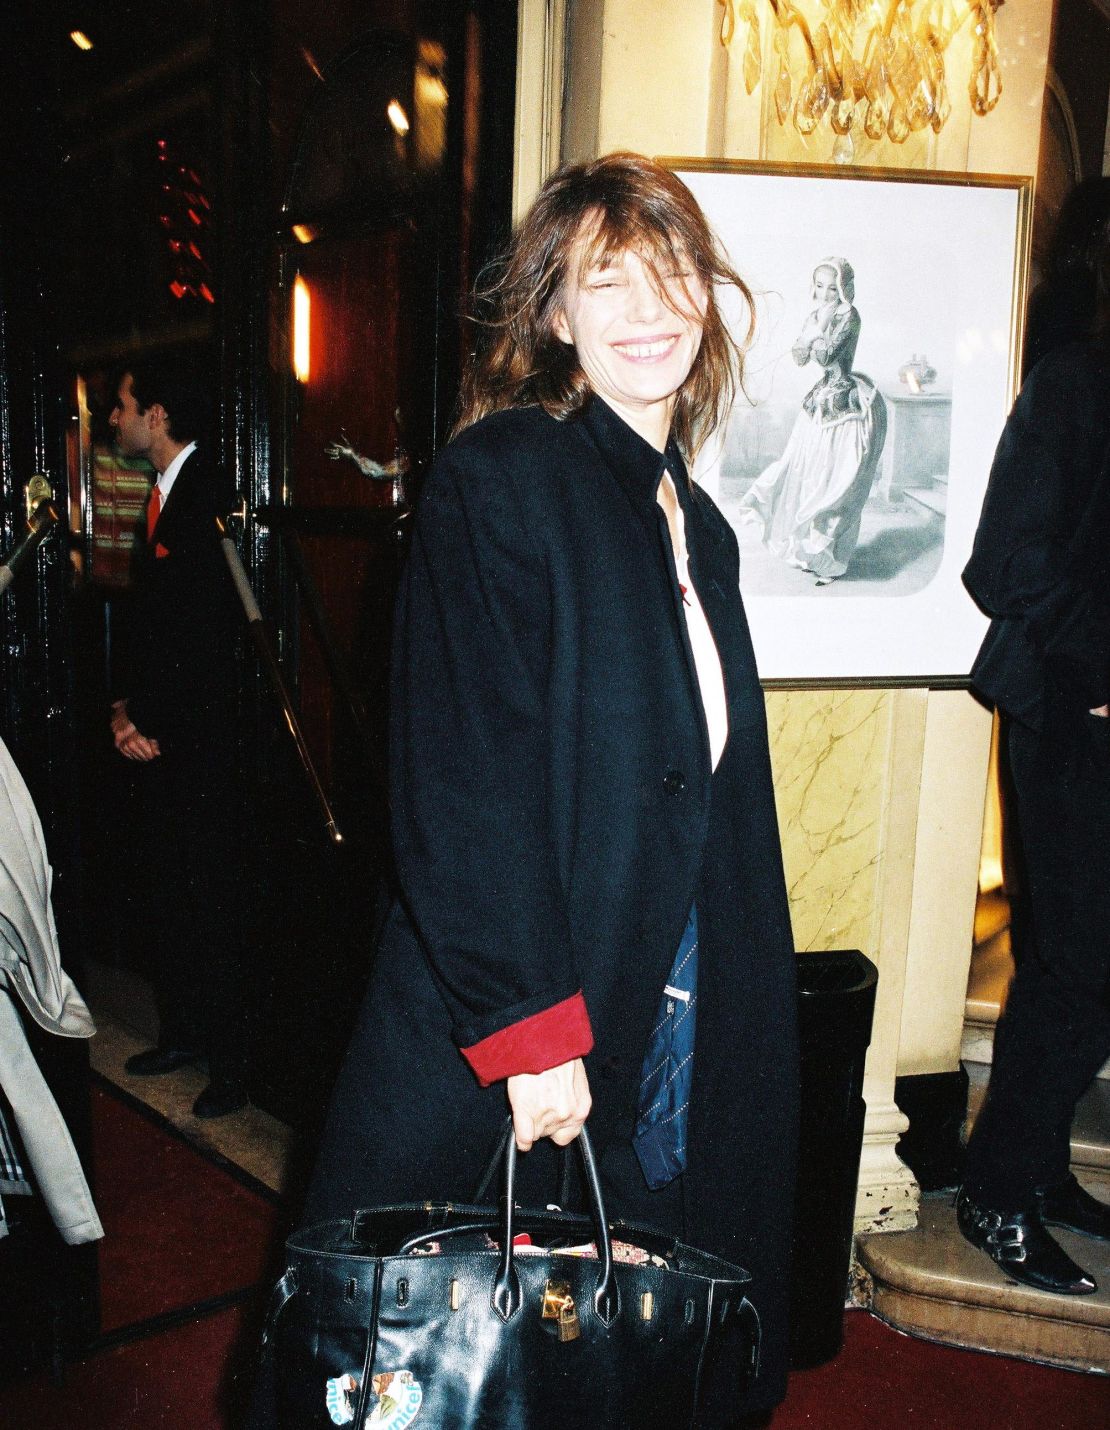 Jane Birkin - Jean Marais 80th birthday at the "Bouffes Parsisiens" theater - 1993. (Photo by Bertrand Rindoff Petroff/Getty Images)